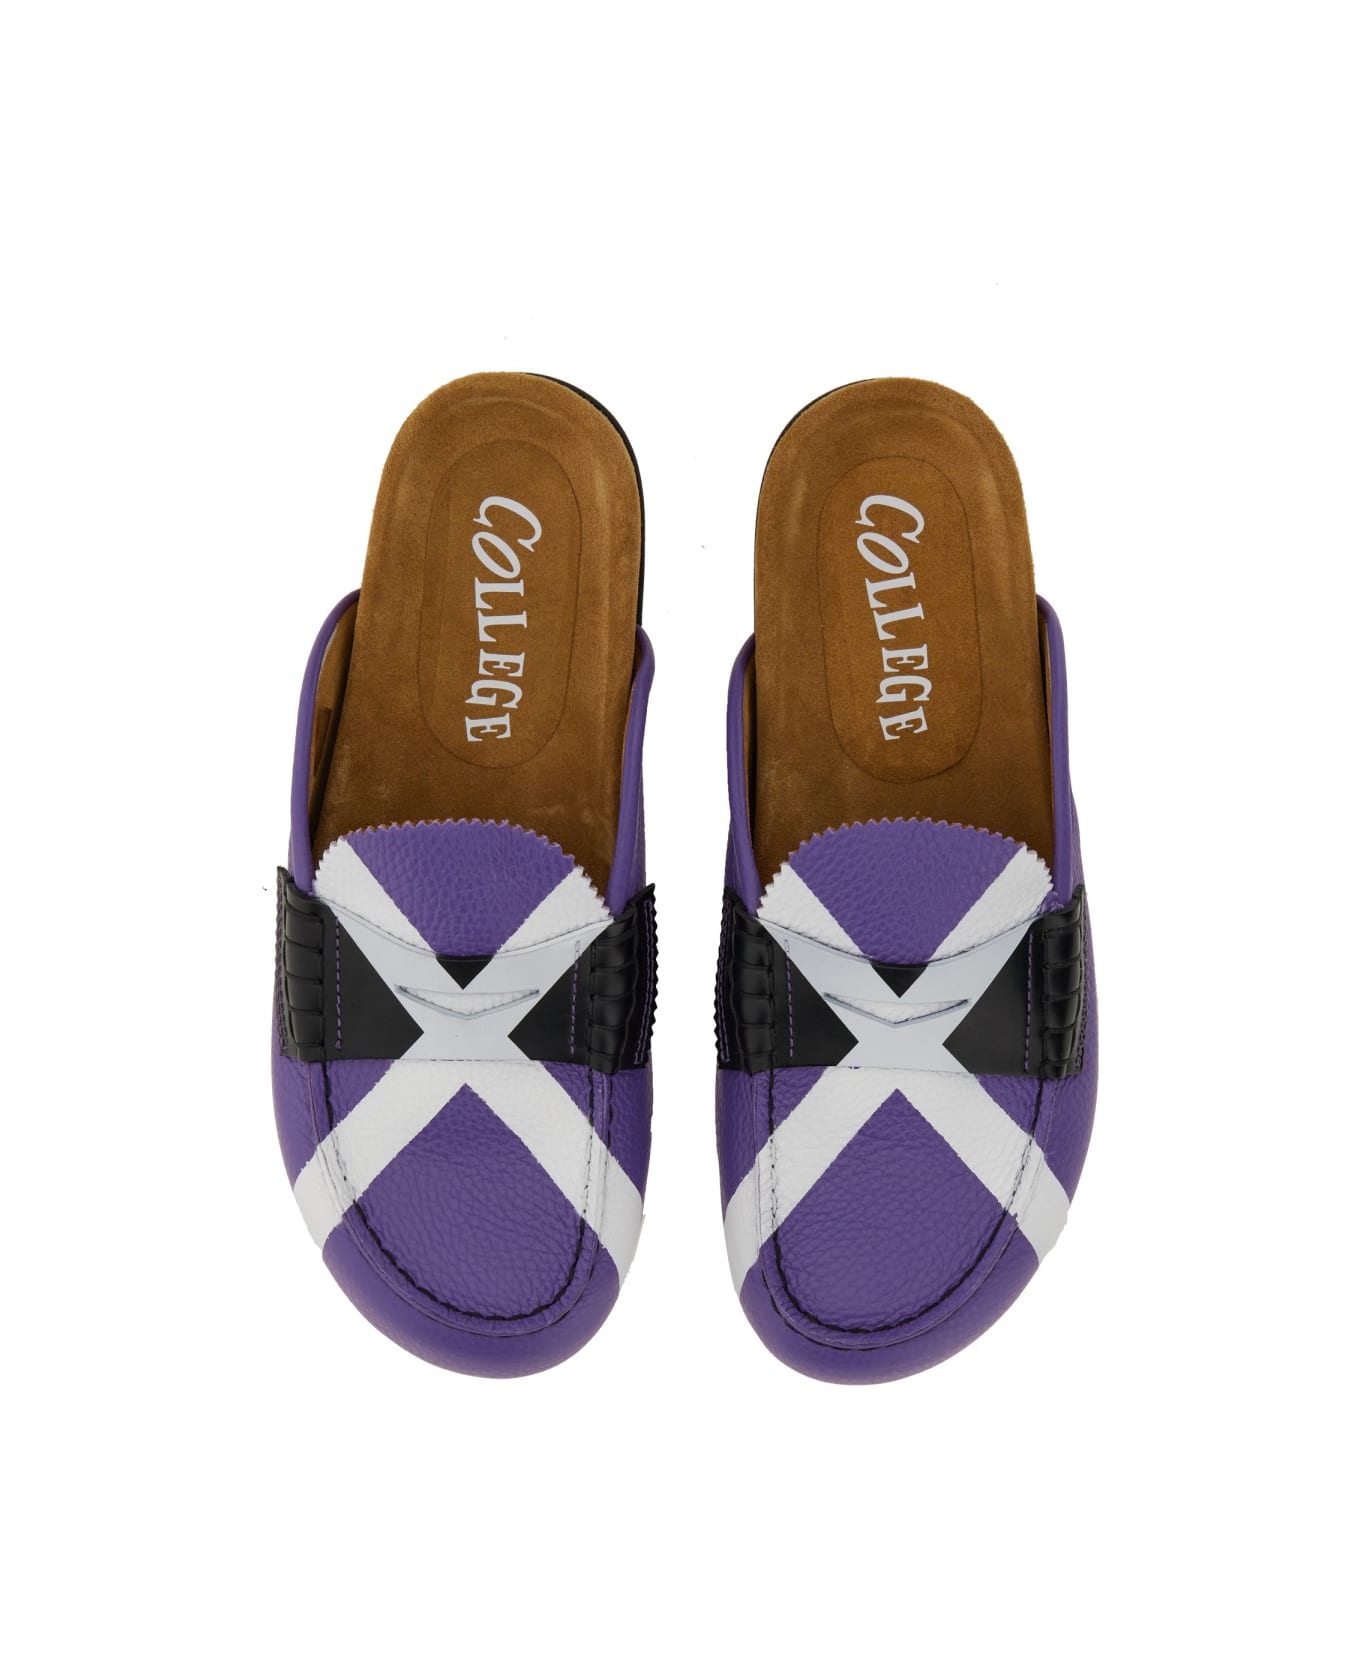 College Sabot With Iconic "x" - PURPLE